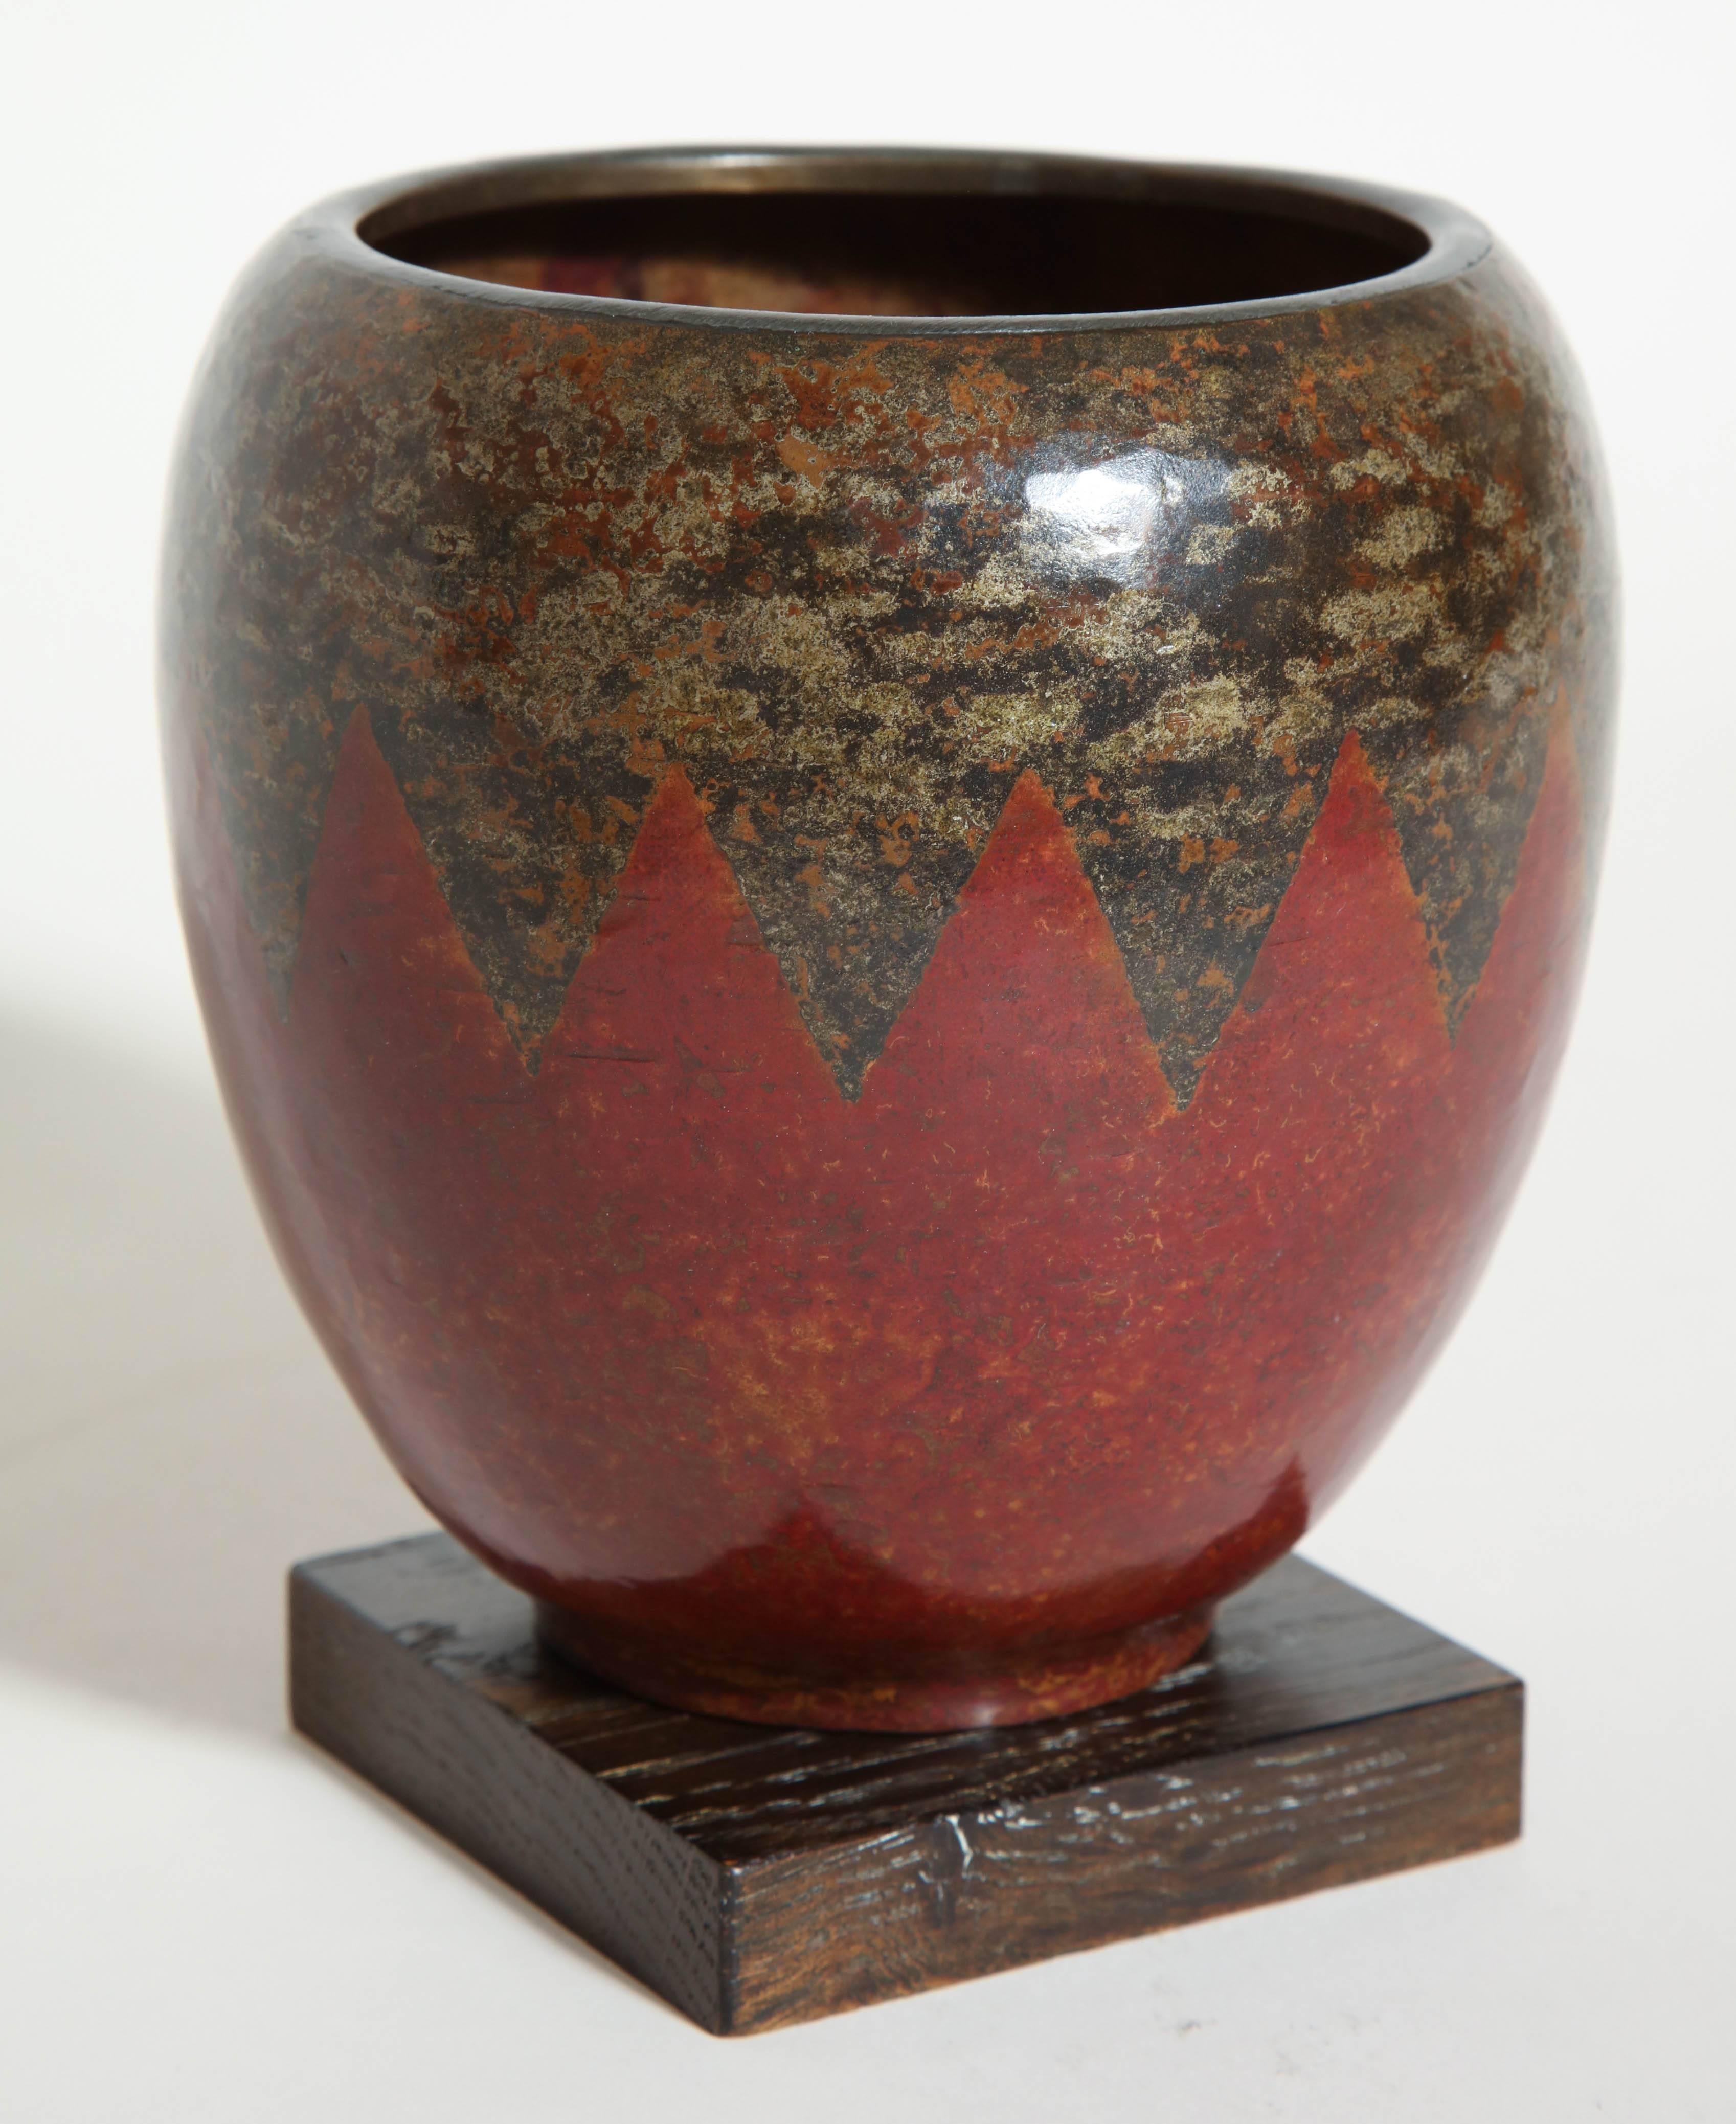 Measures: 4 7/8'' high; 4 7/8'' wide
5 1/2'' high on oak base

This ovoid vase with a large annular collar is patinated with fire and has inlays of silver on triangles pointing down, also patinated with fire. The lower section is intense red.